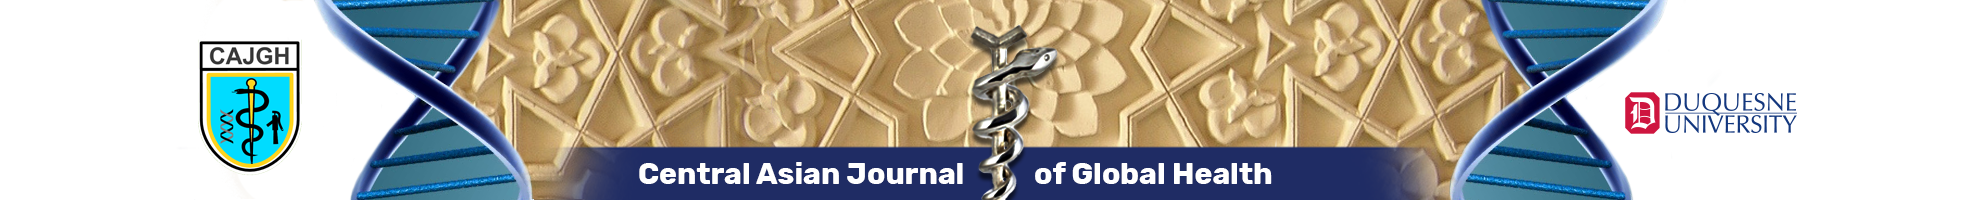 Central Asian Journal of Global Health